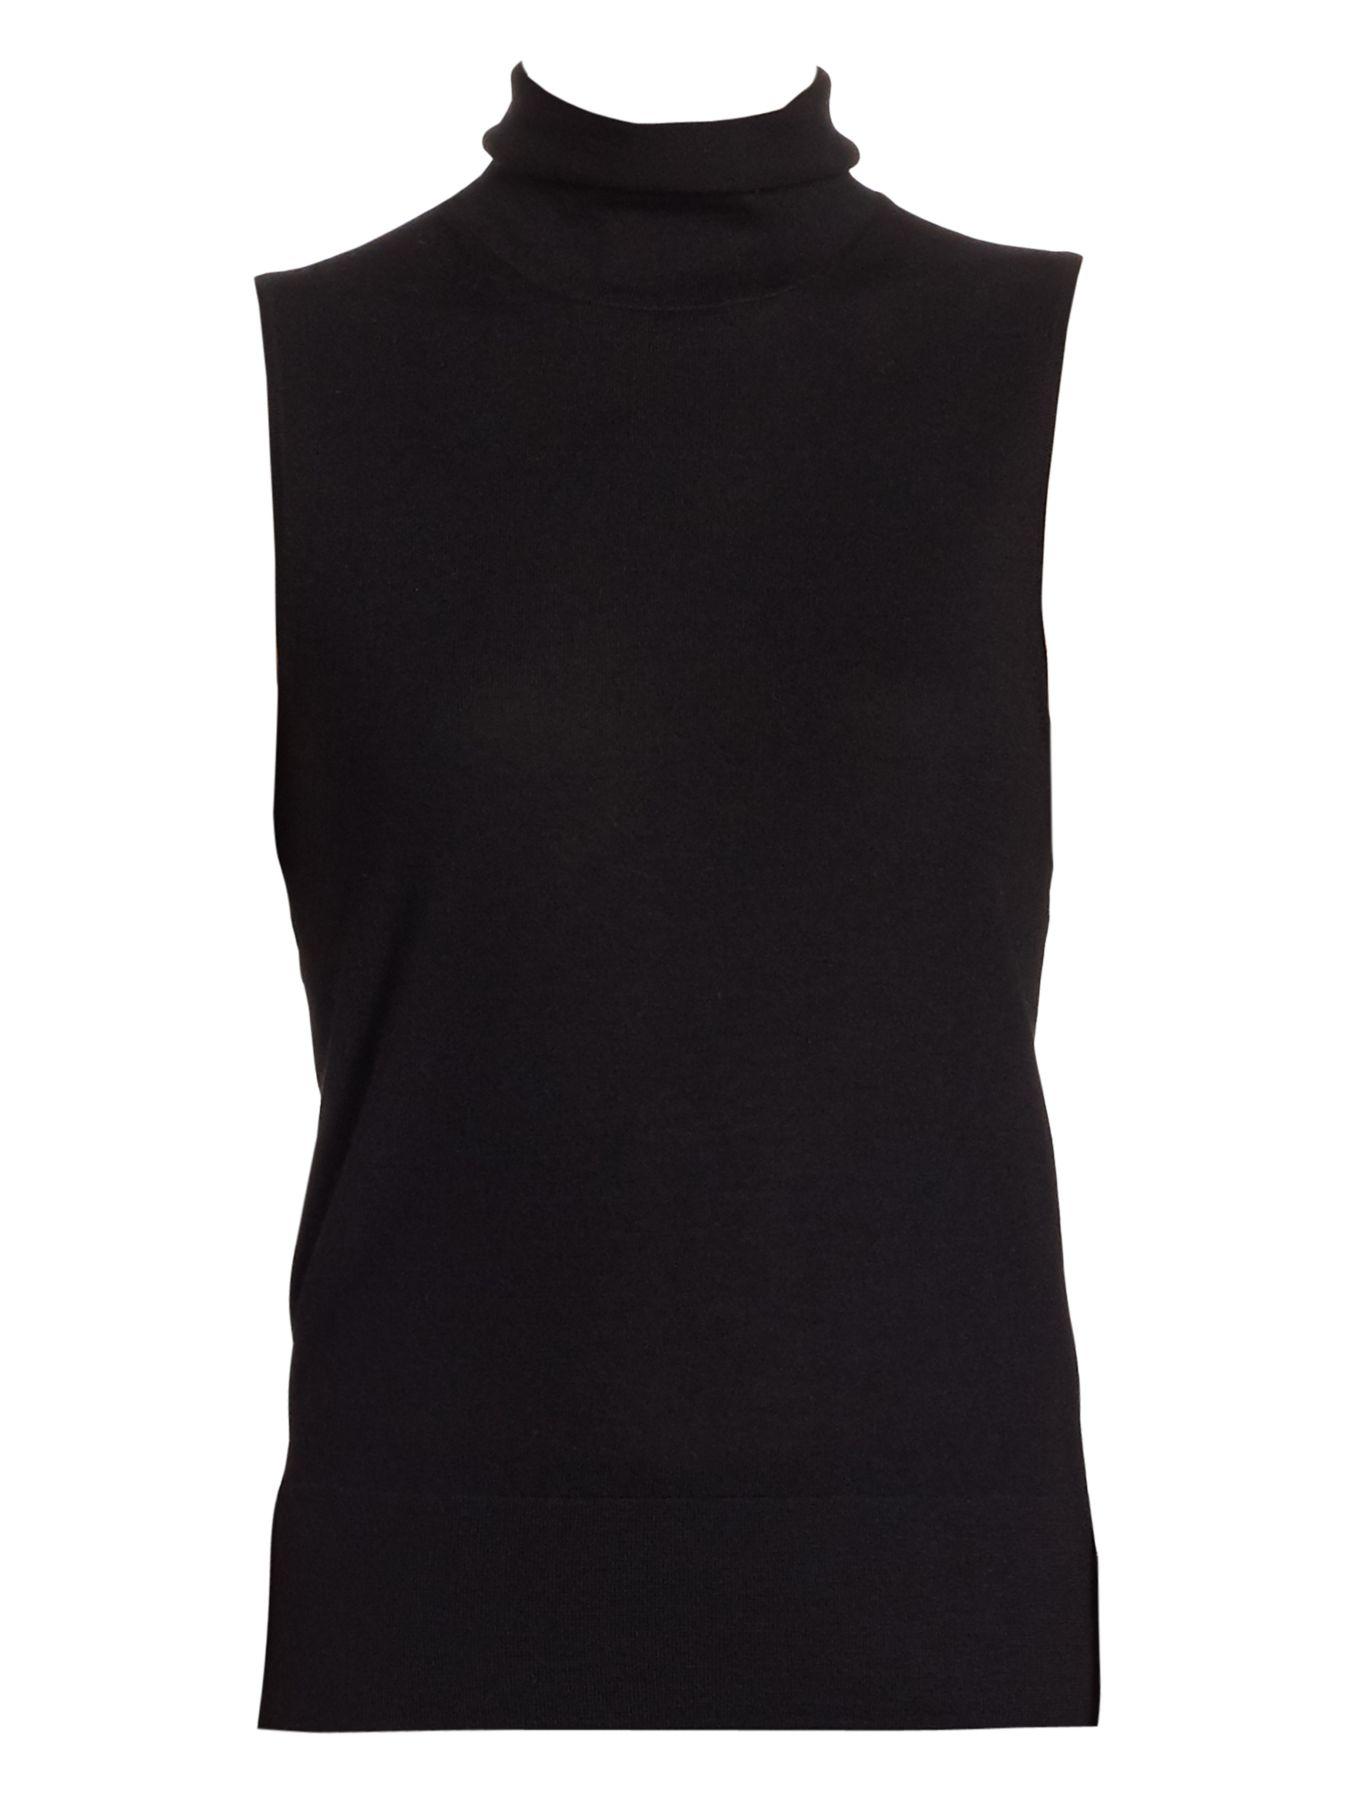 Saks Fifth Avenue Collection Cashmere Turtleneck Shell in Black - Lyst